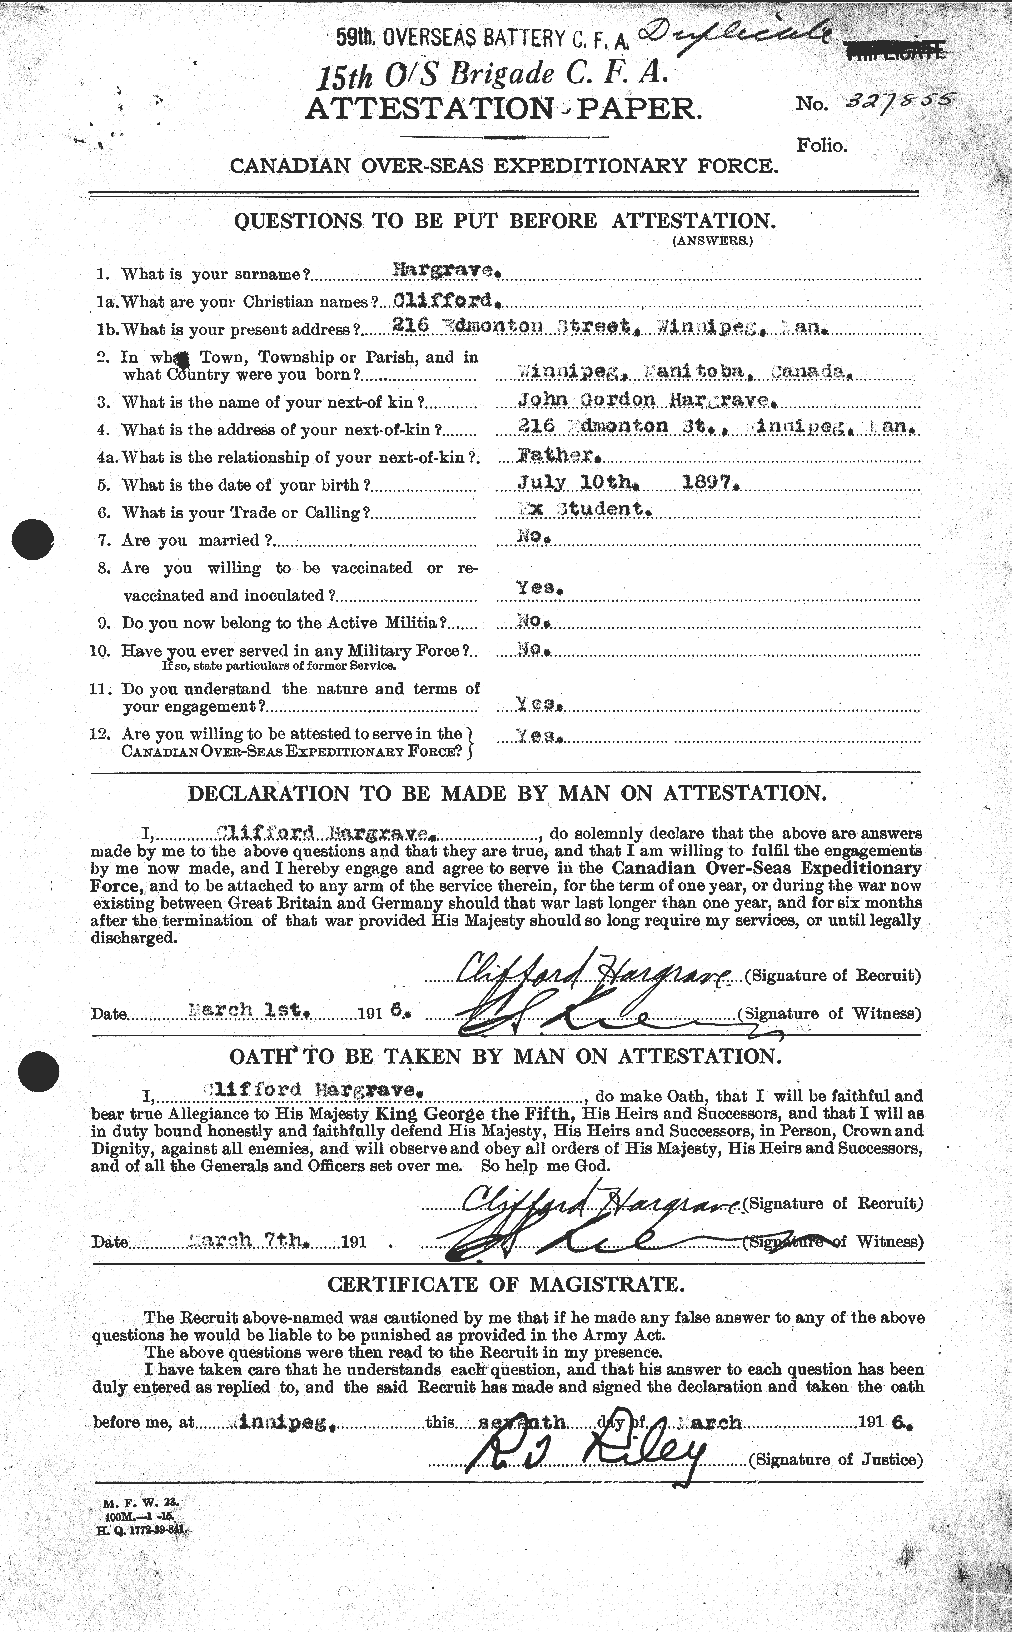 Personnel Records of the First World War - CEF 378029a